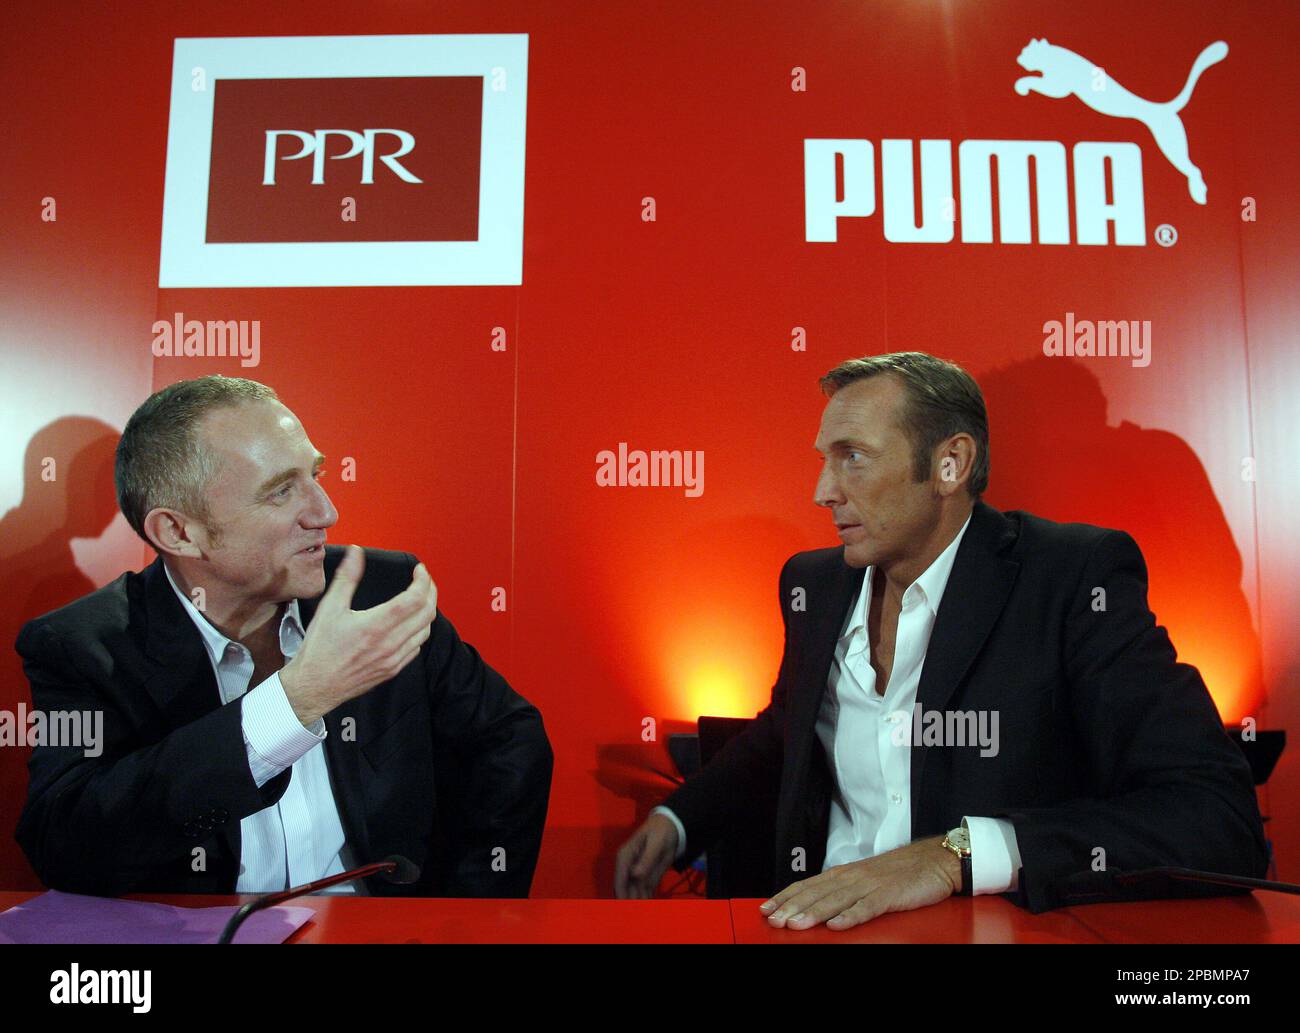 Francois-Henri Pinault, Chairman and Chief Executive of French luxury goods  PPR Group, left, and Jochen Zeitz, CEO of German sports goods maker Puma,  right, talk prior to a news conference in Nuremberg,